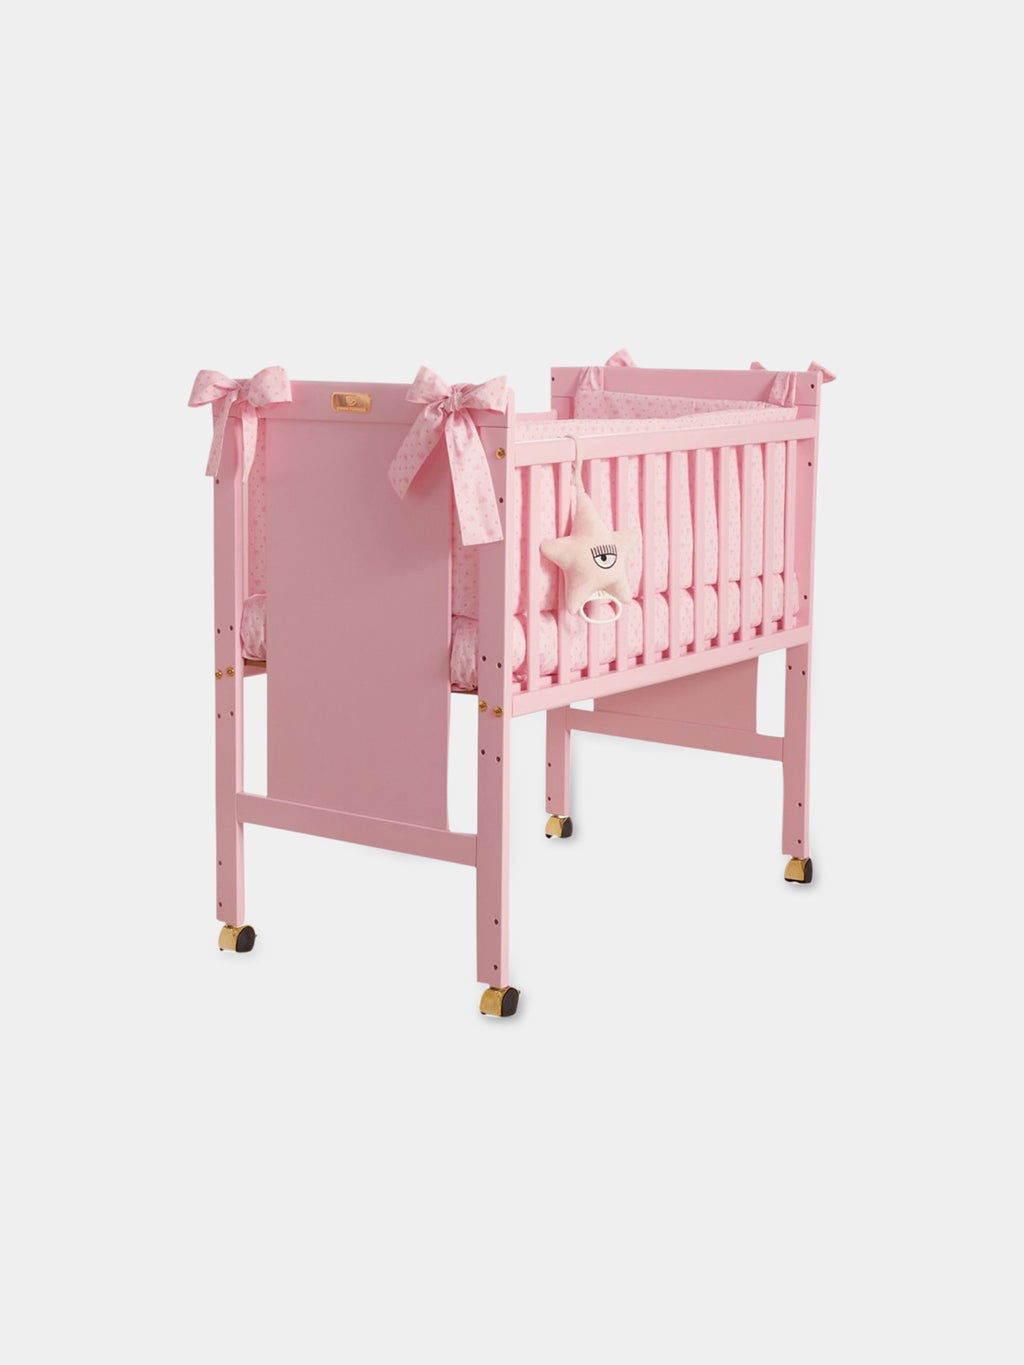 Pink Mini-me crib for baby girl with logo